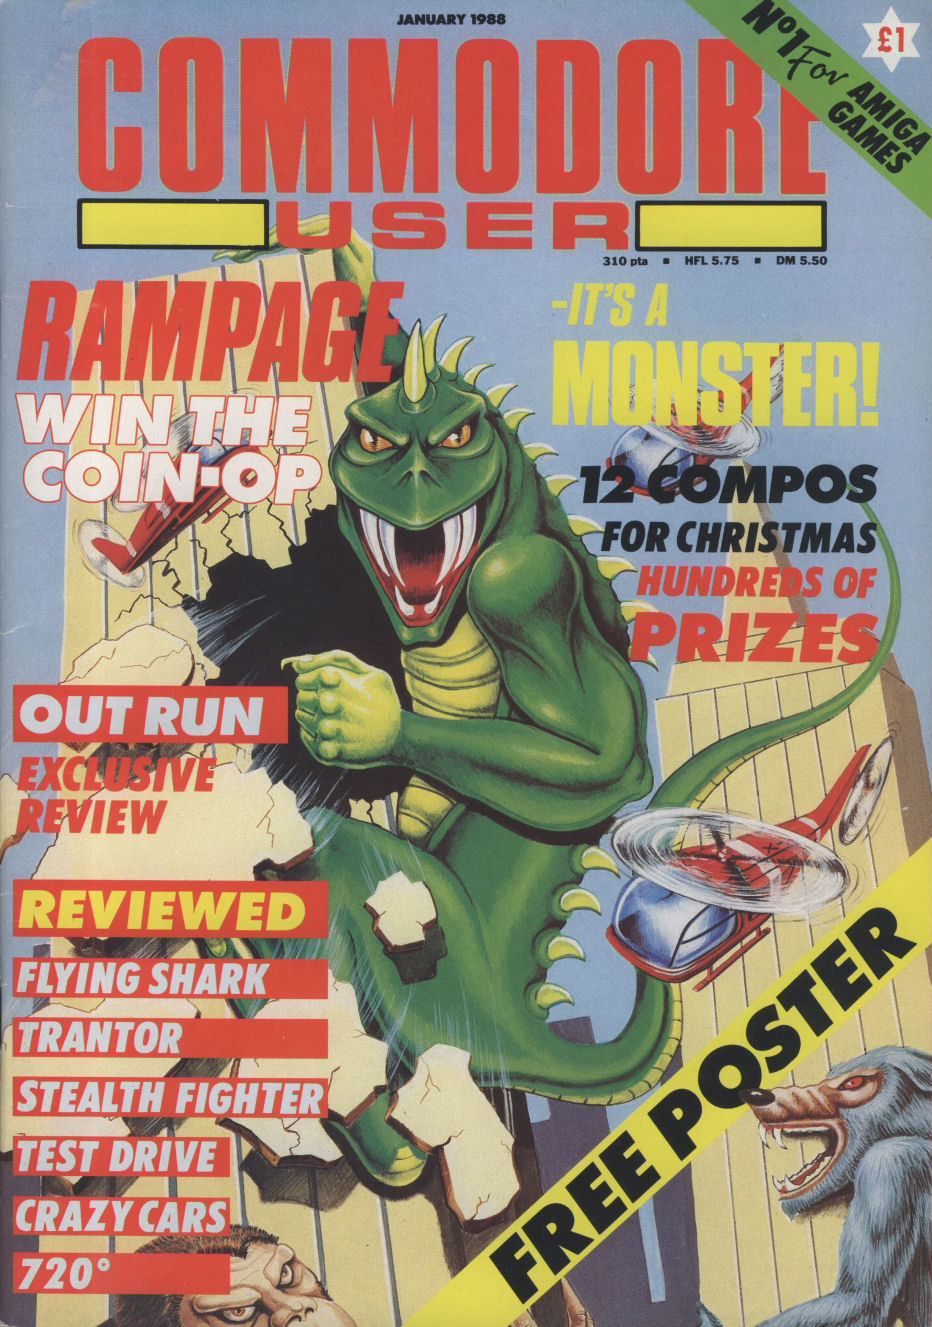 Commodore User Issue 39, Magazines from the Past Wiki